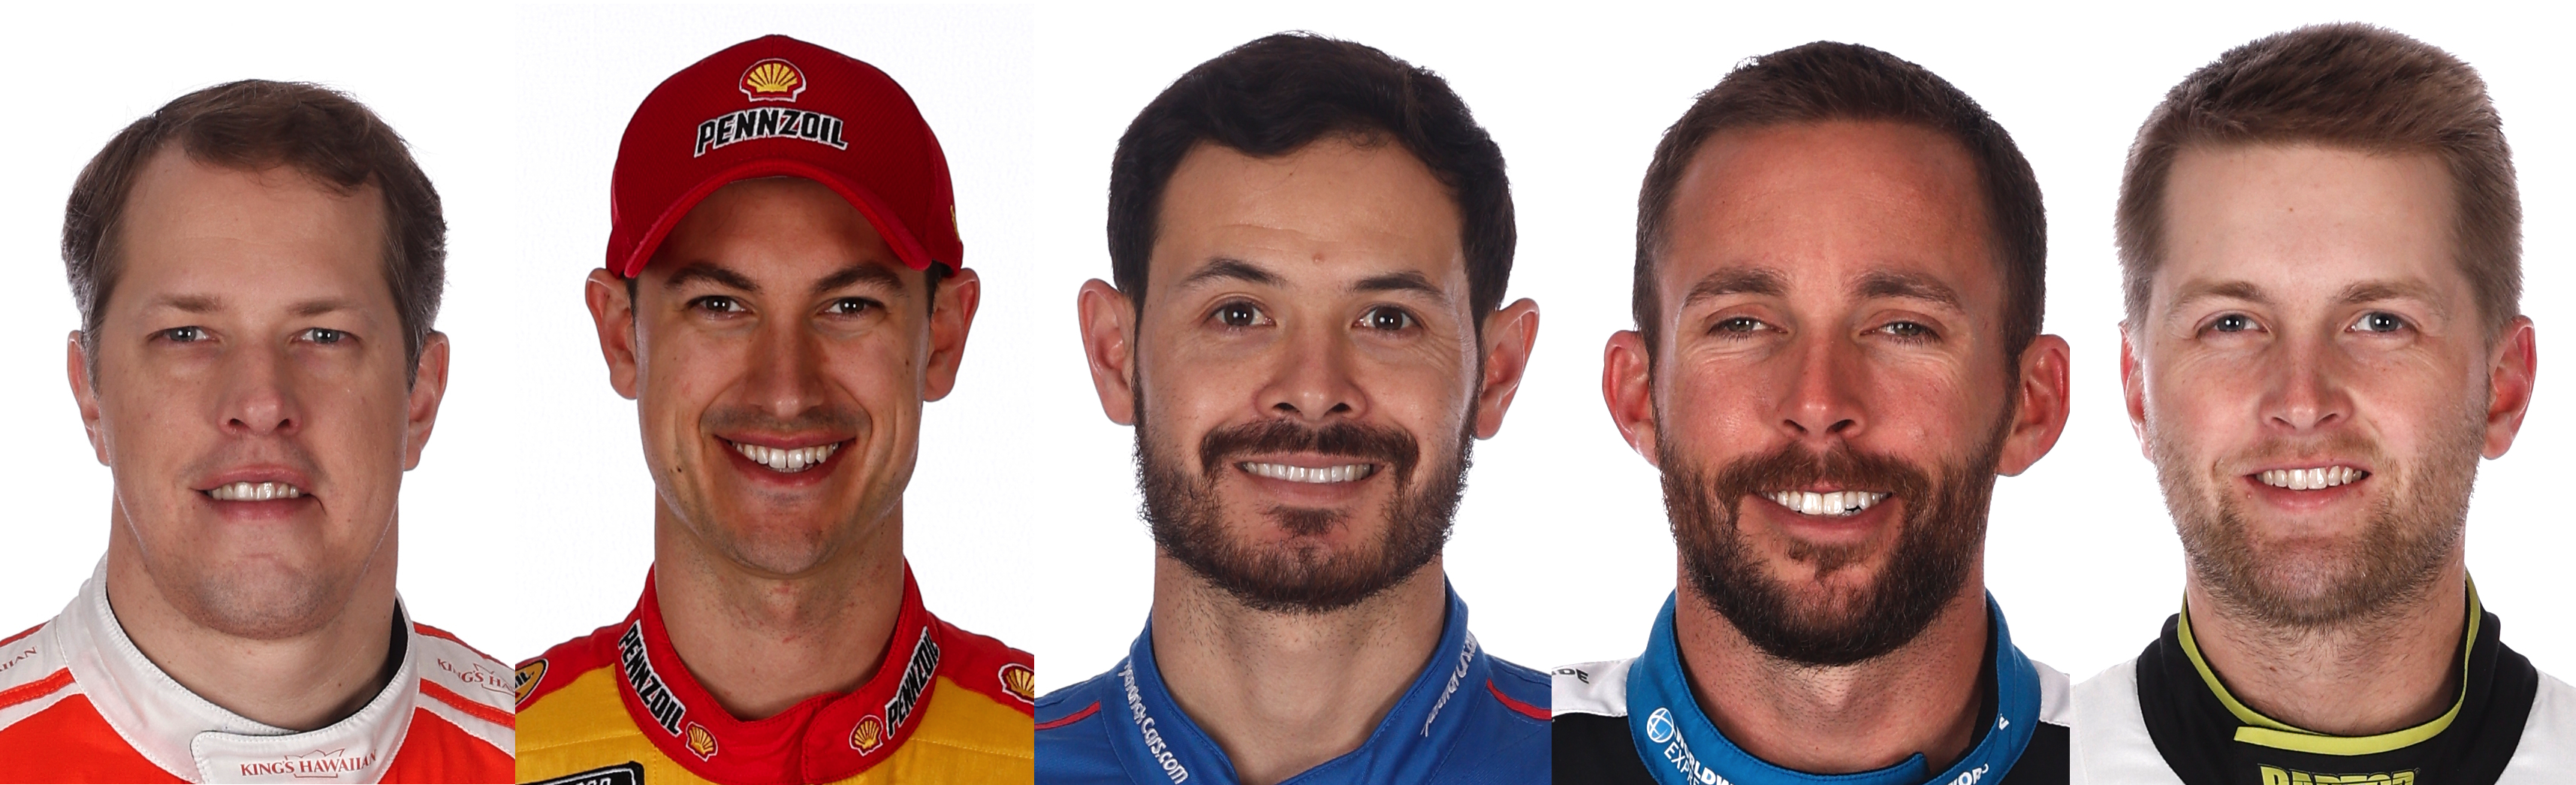 This fantastic five may have what it takes to win Sunday's Ambetter Health 400 at Atlanta Motor Speedway. (Photo: Chris Graythen | Getty Images)